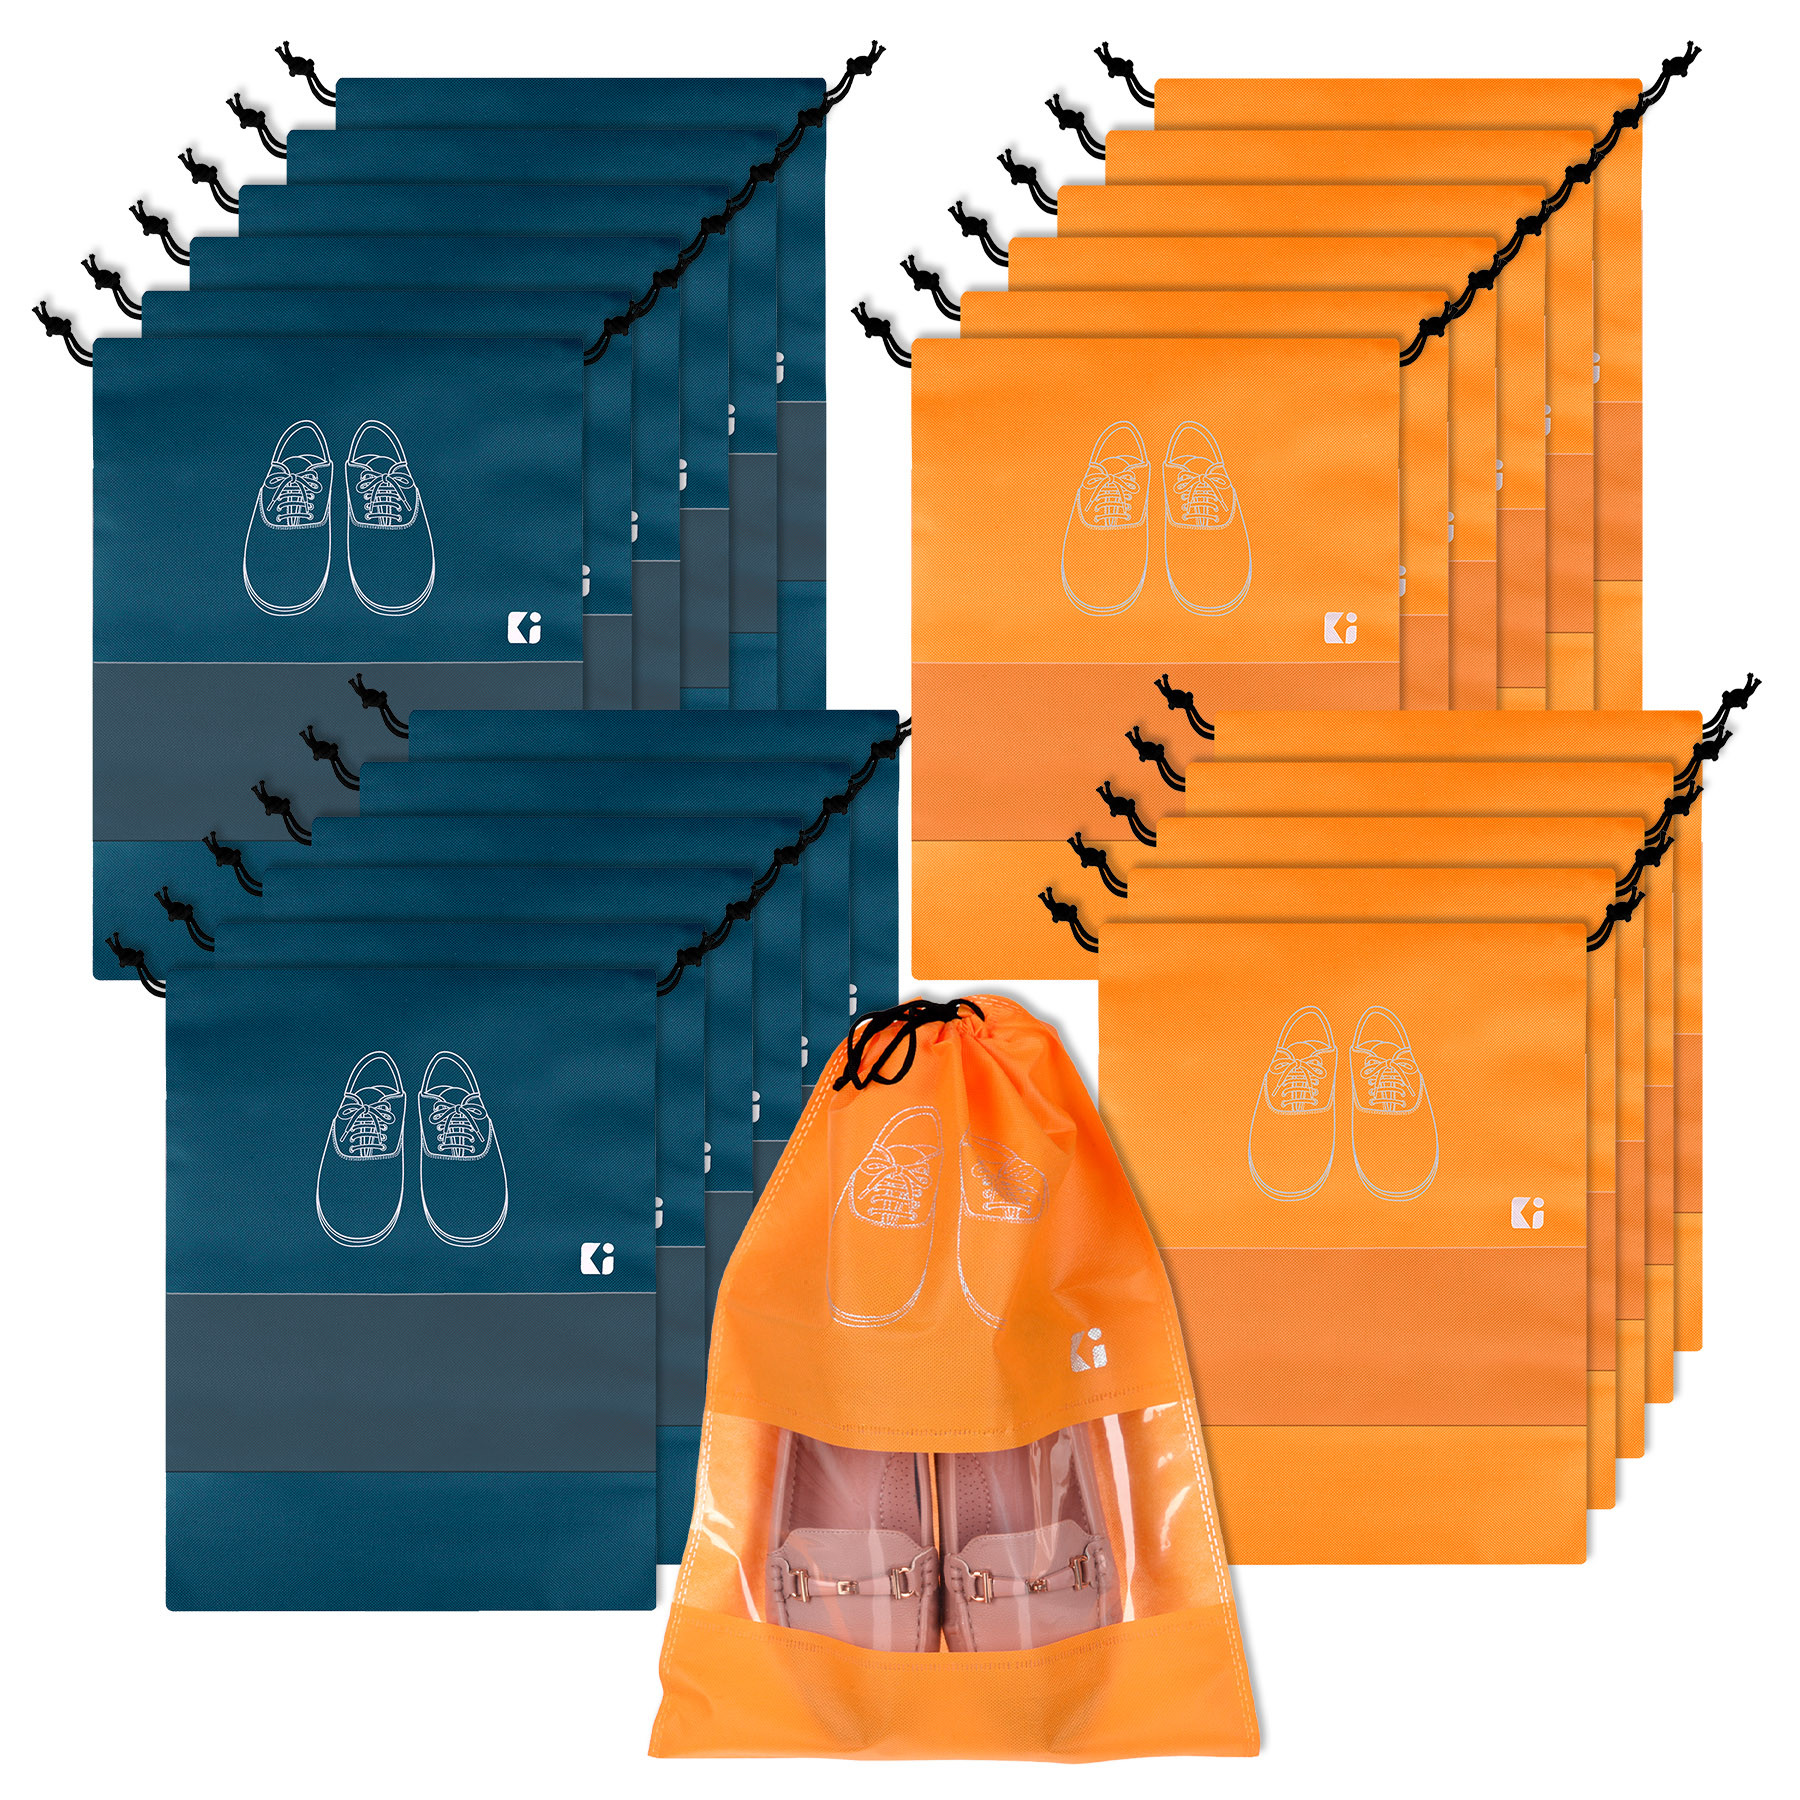 Kuber Industries Shoe Bags | Shoe Bags for Travel | Non-Woven Shoe Storage Bags | Storage Organizers Set | Shoe Cover with Transparent Window | Shoe Dori Cover | Navy Blue & Orange